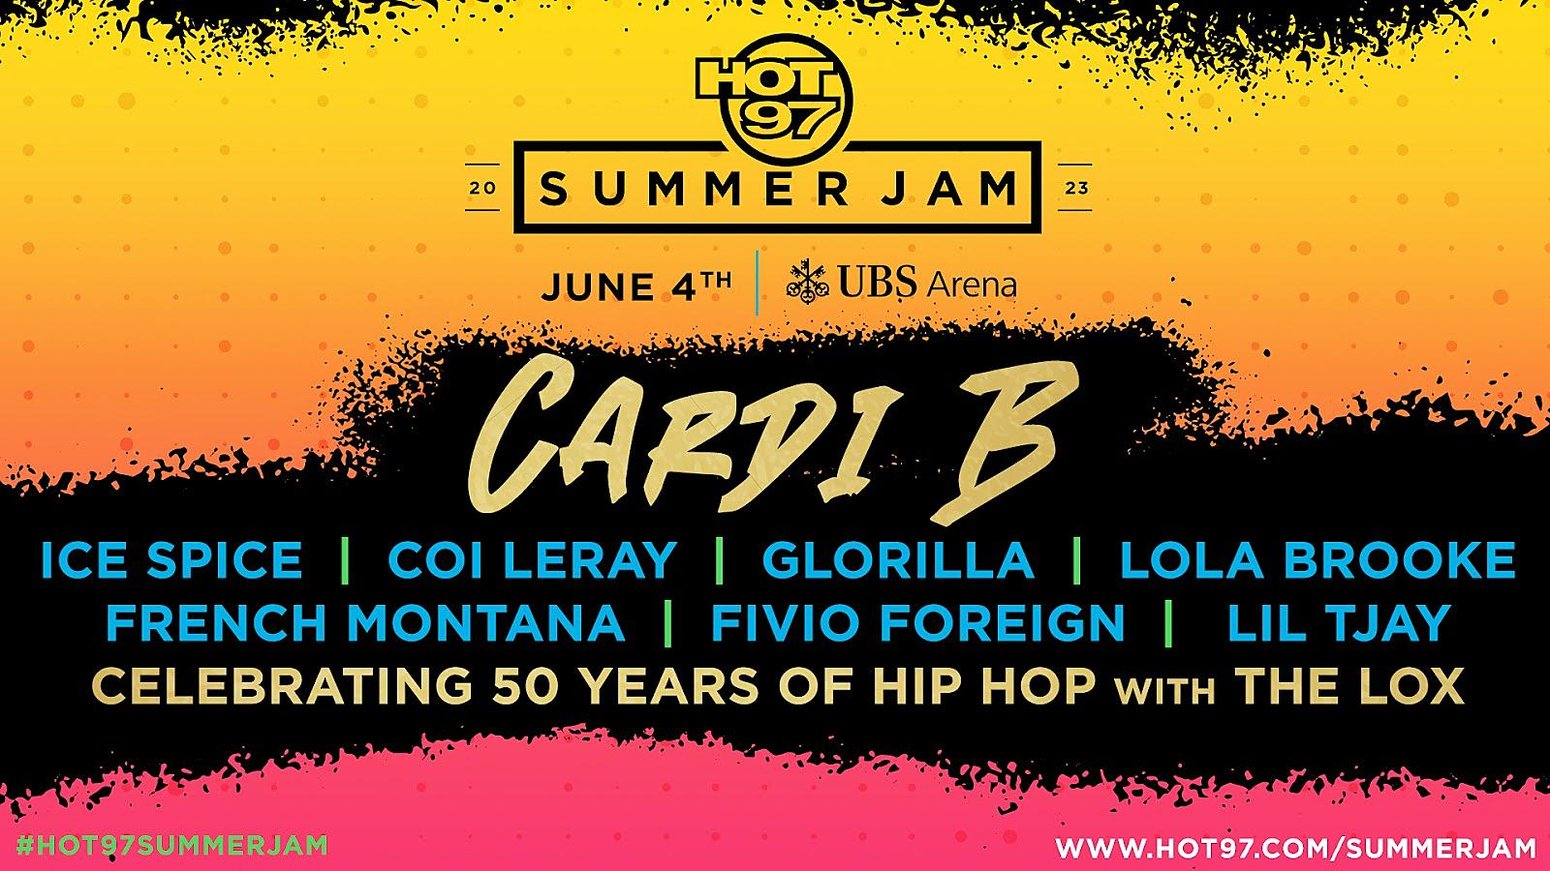 How To Find Cheap Hot 97 Summer Jam Tickets + 2023 Lineup